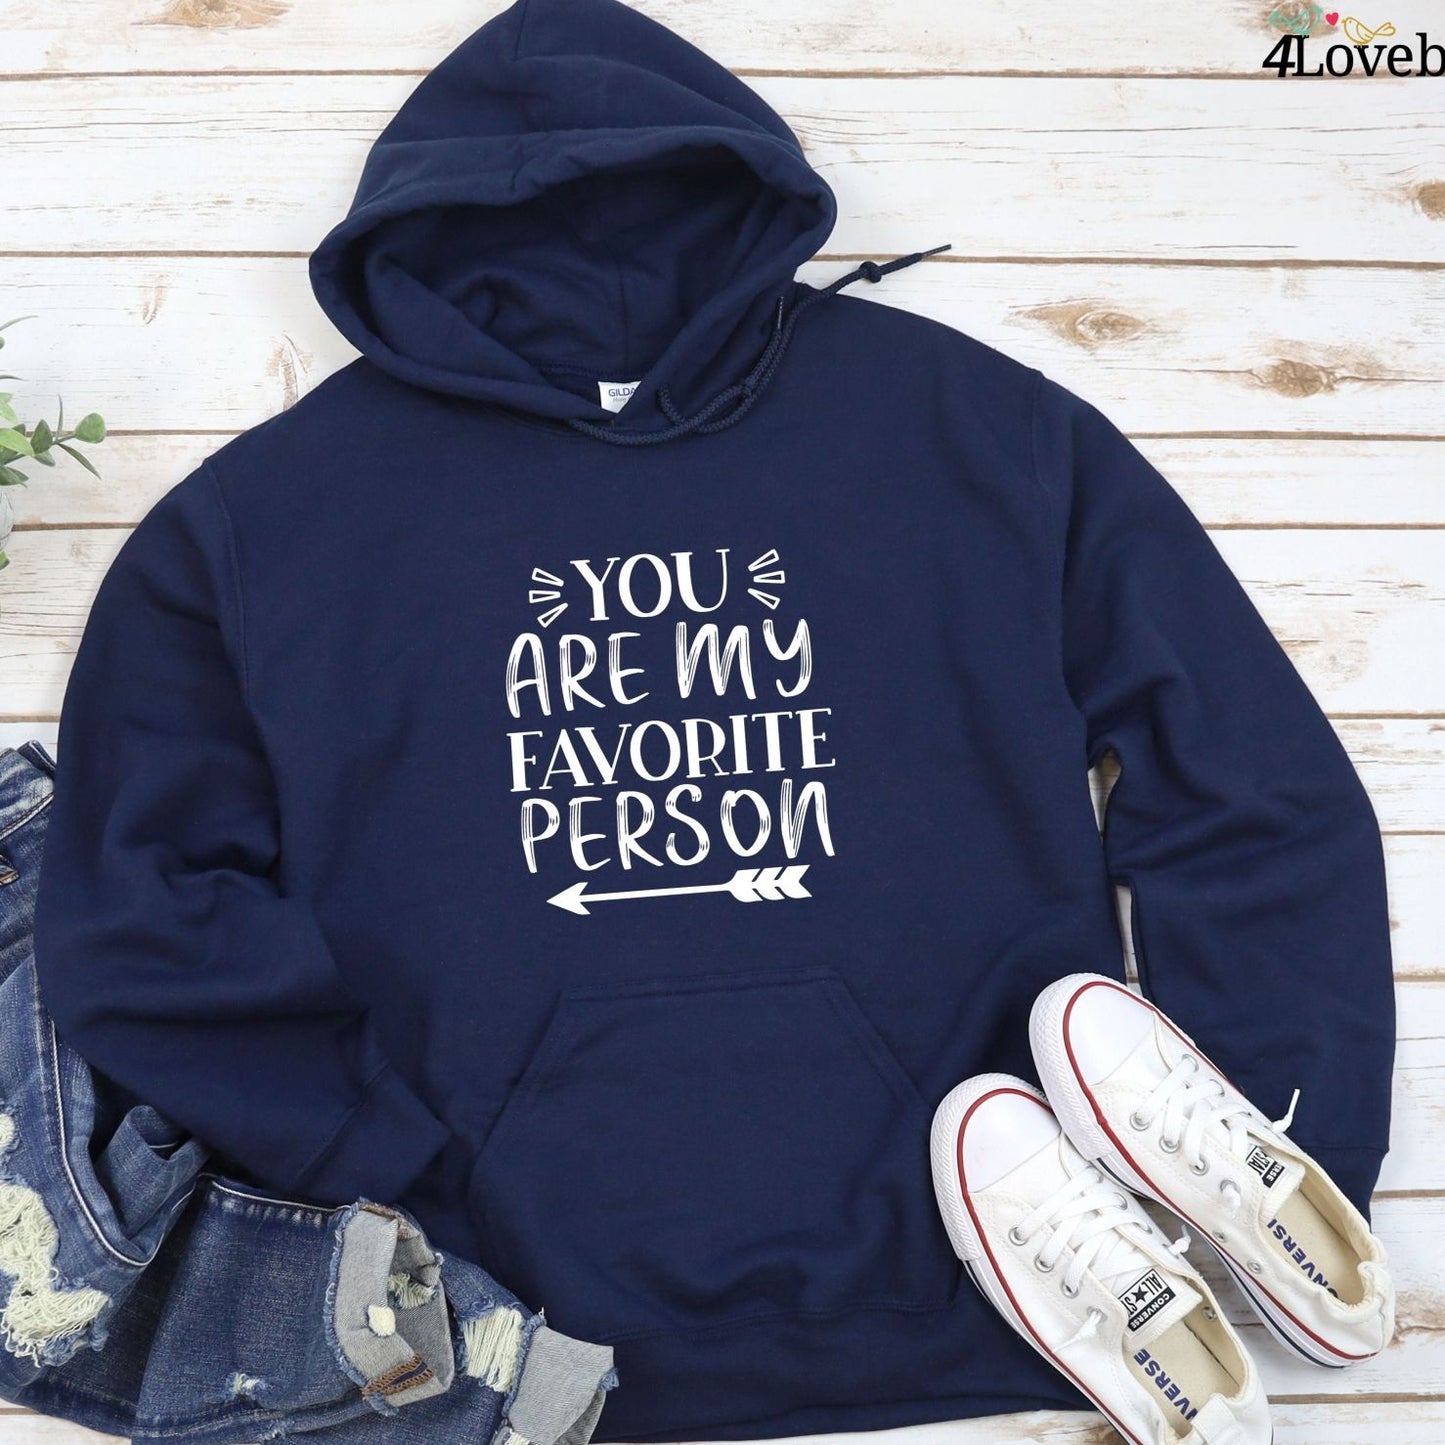 Favorite Person Matching Outfits Set for Couples - Ideal Valentine's Day Gift